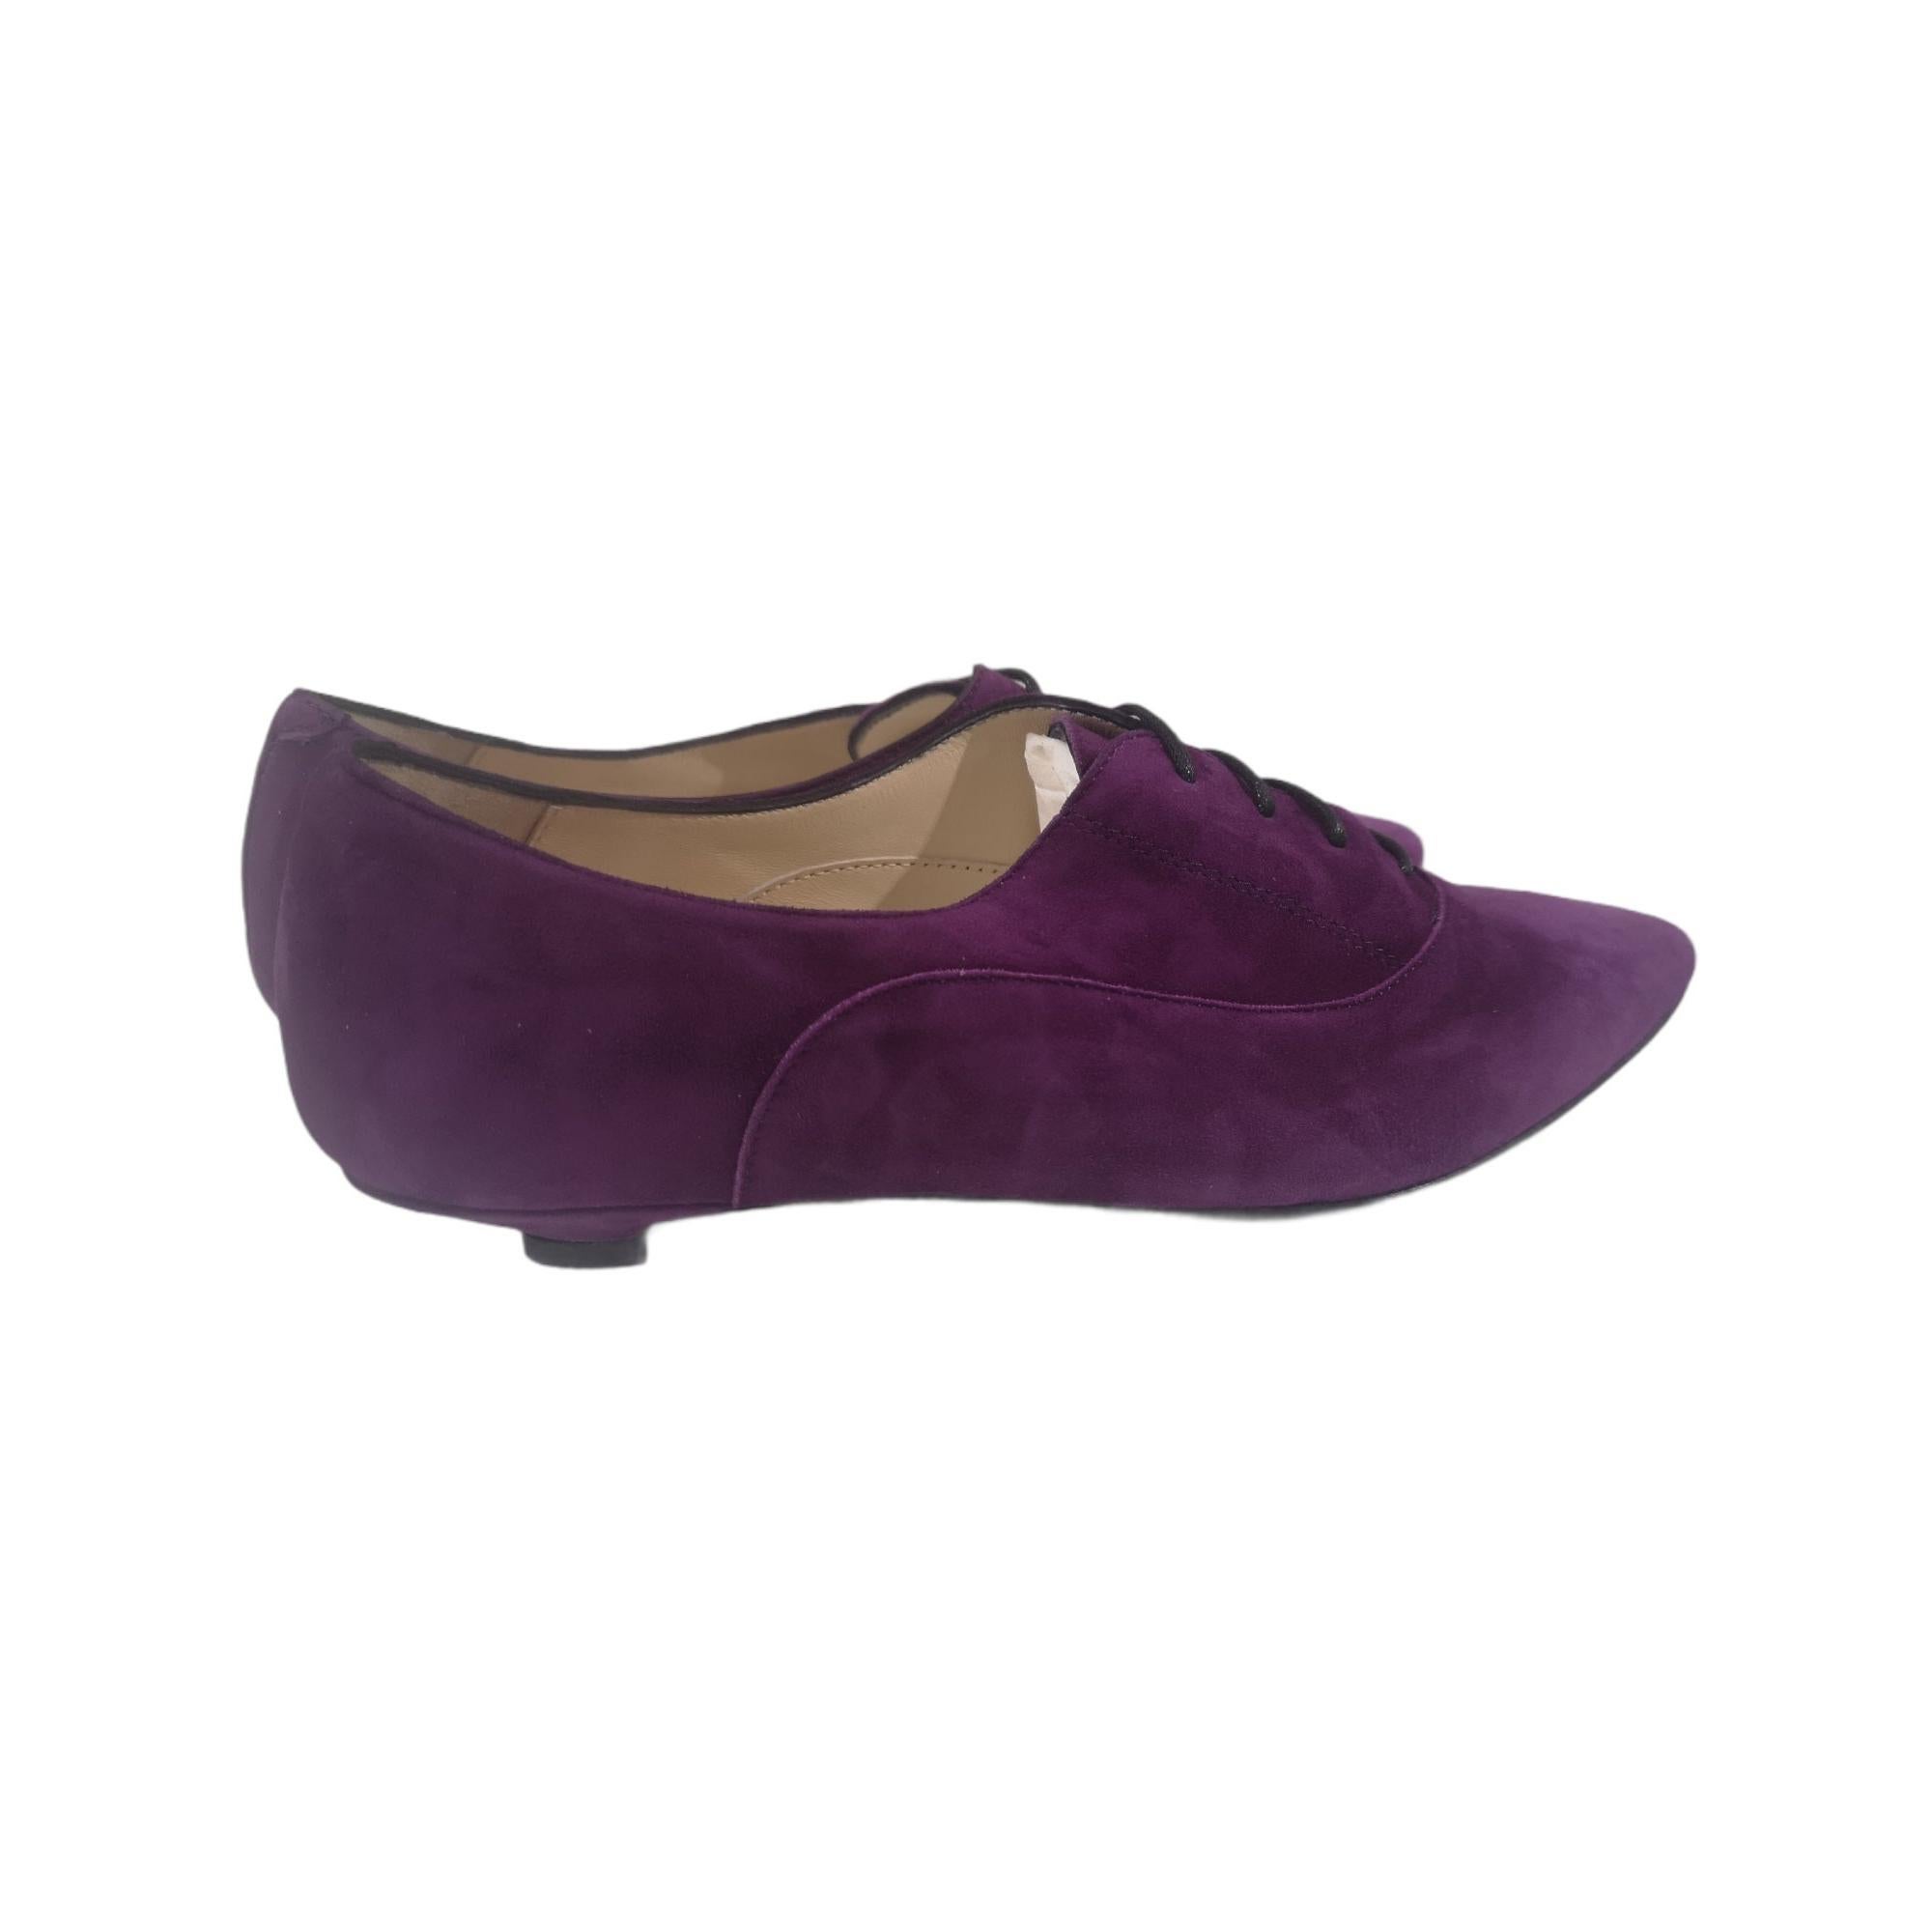 Purple suede ankle boot NWOT
totally made in italy
size available:  35 up to 39/ IT